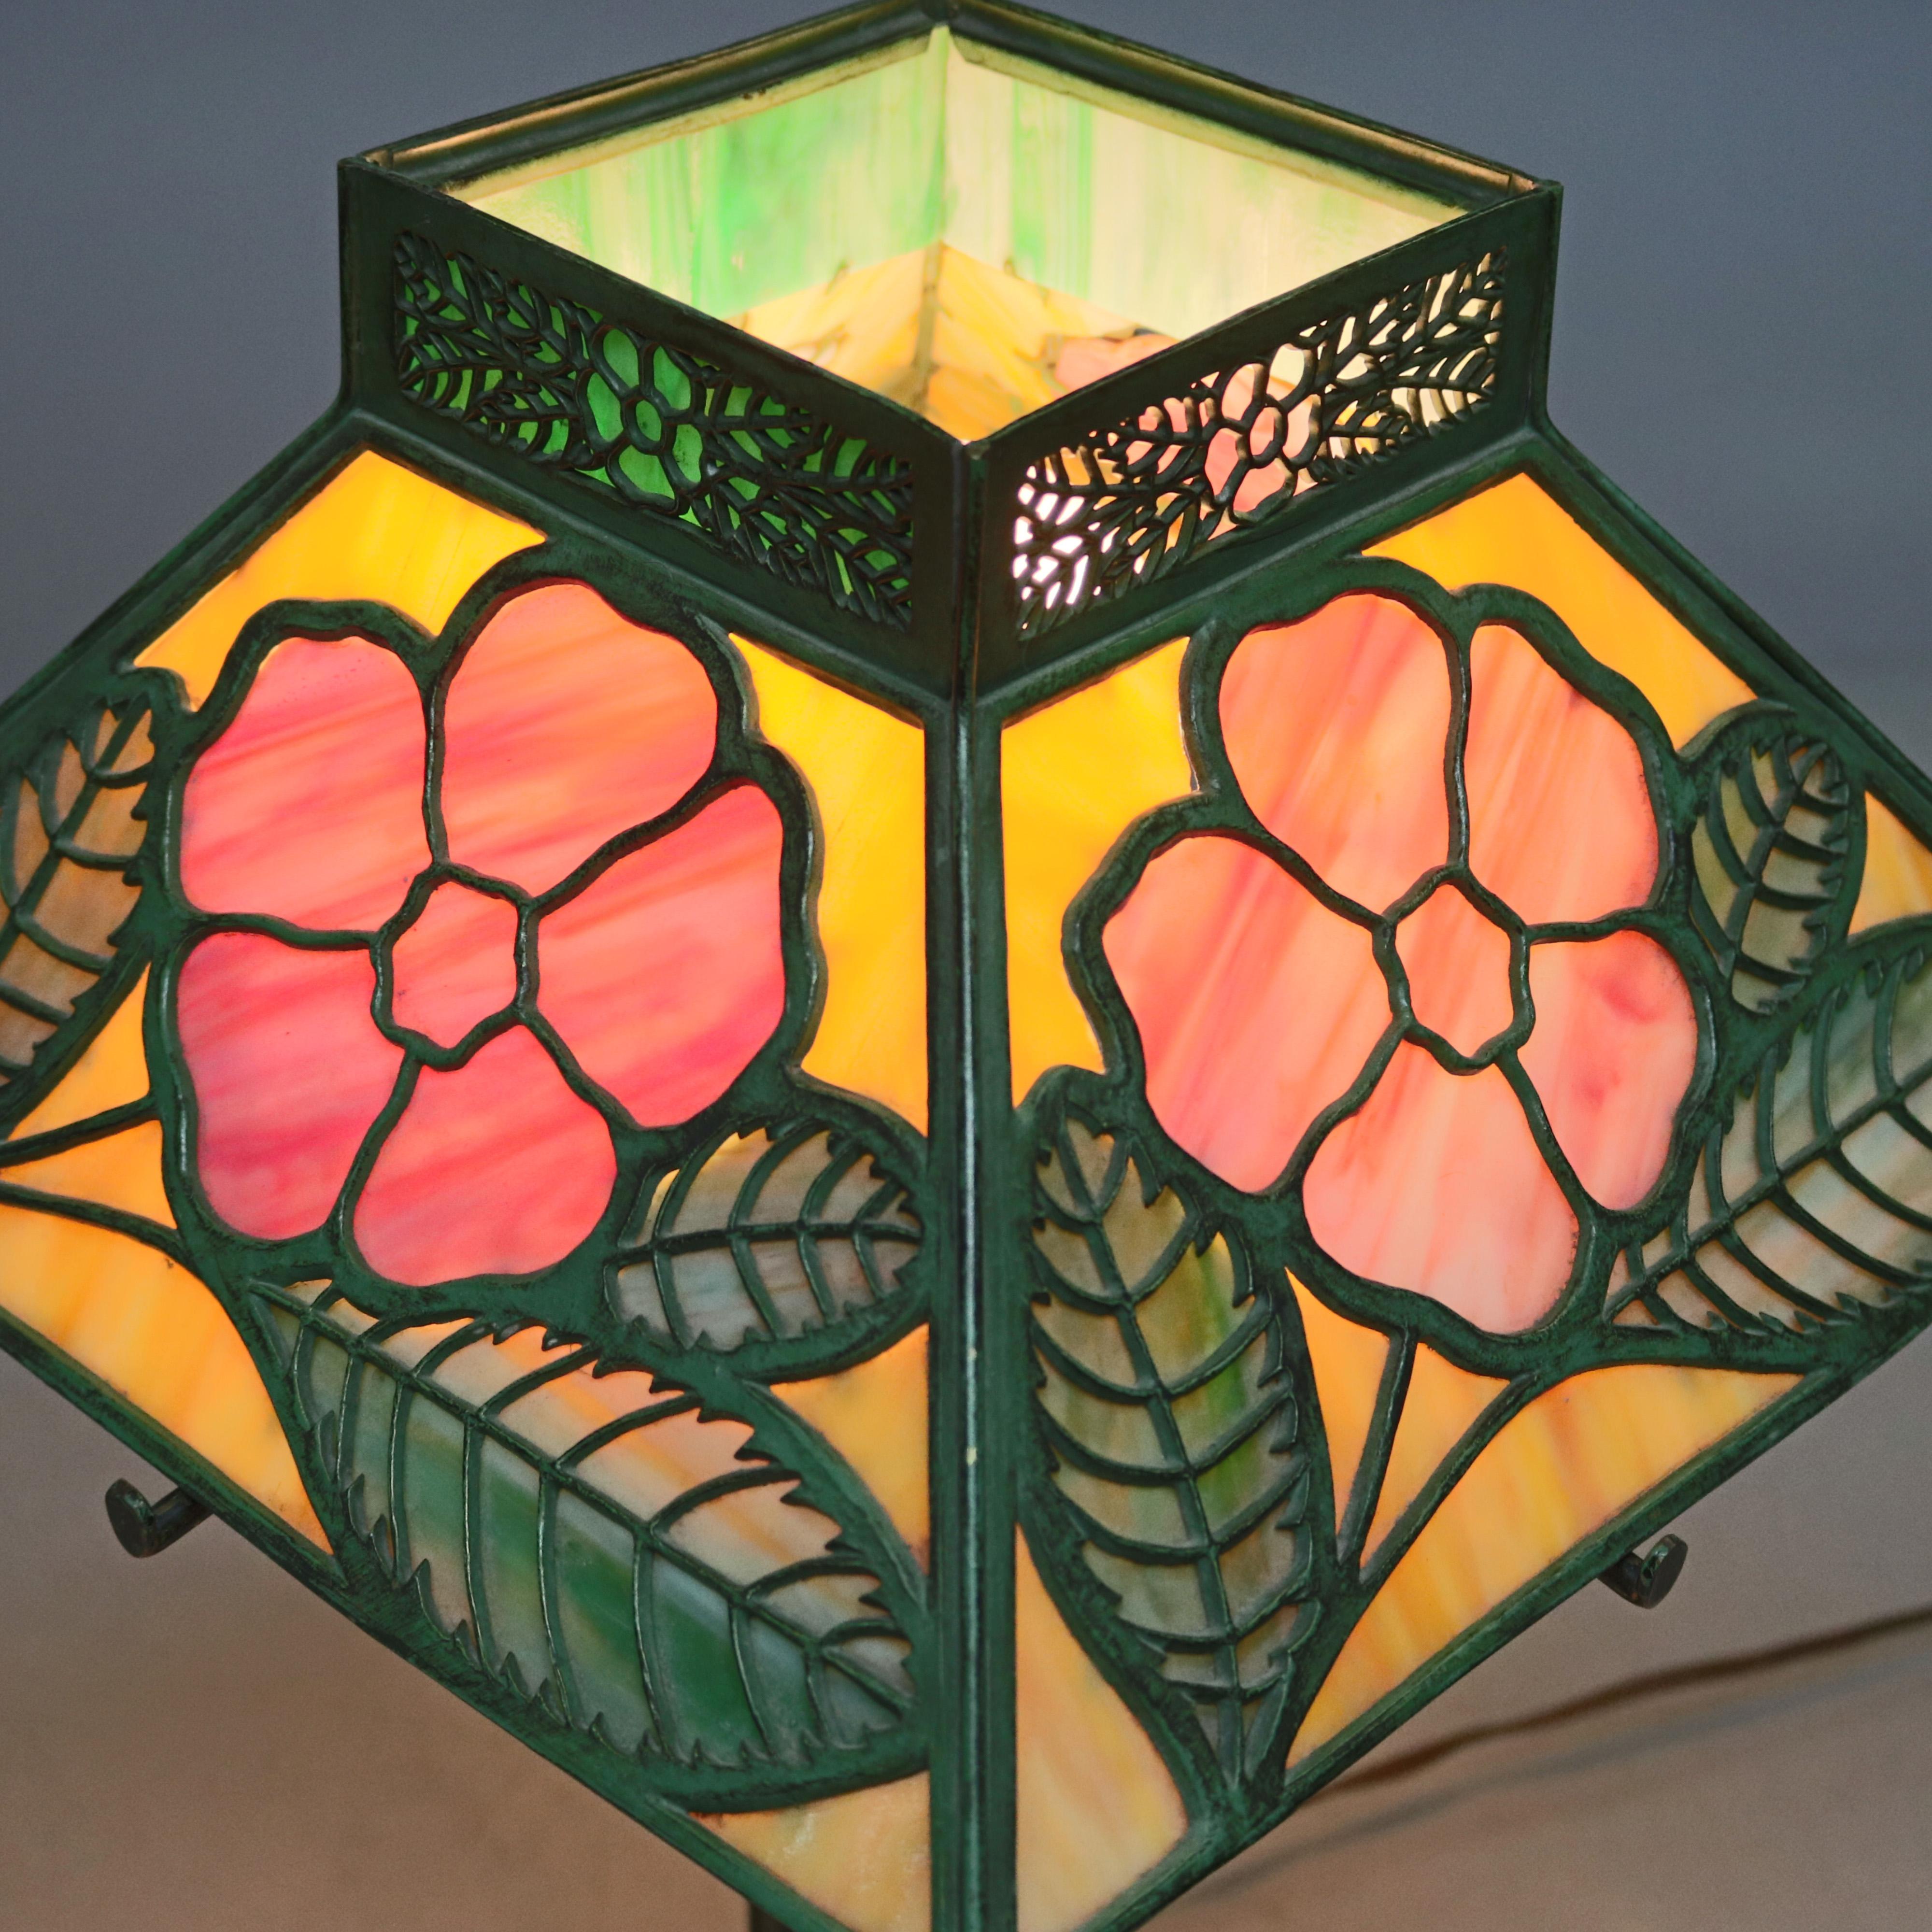 Antique Bradley & Hubbard table lamp offers floral Murano glass flared shade surmounting single socket base, circa 1920.

Measures: 19